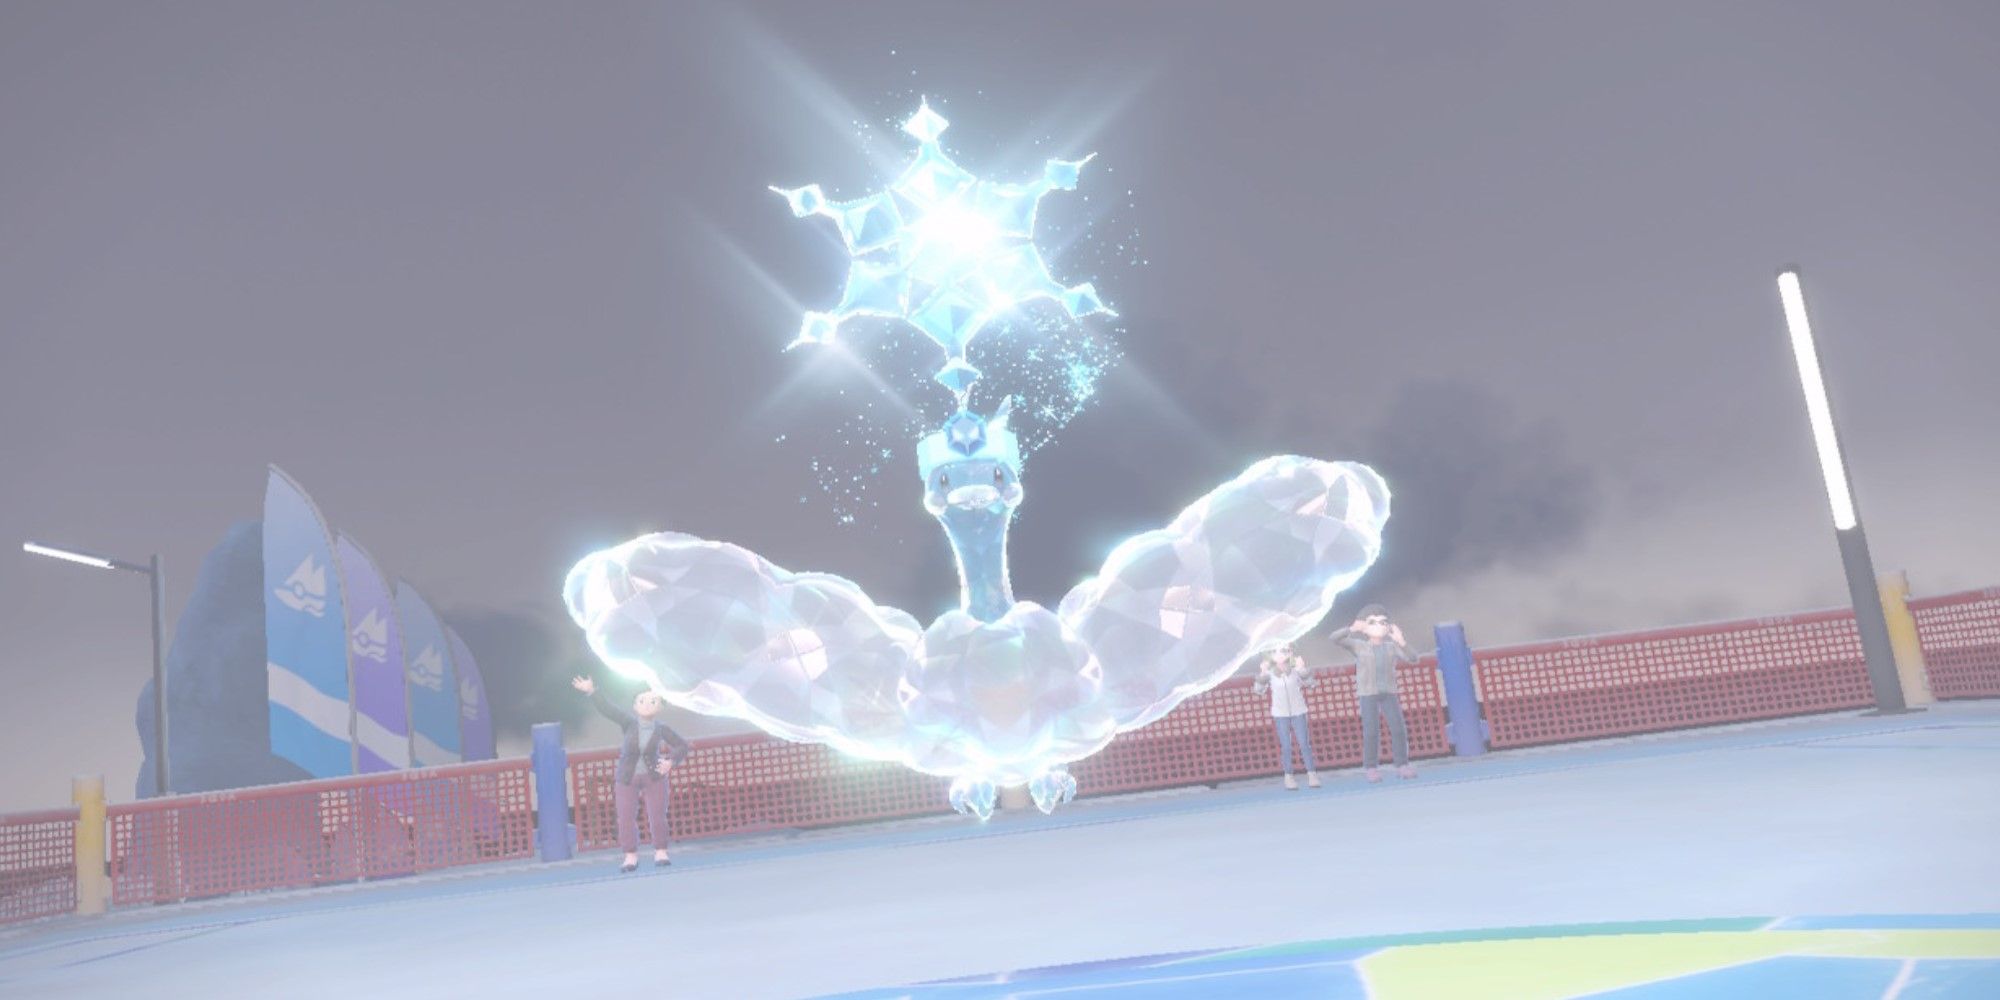 Pokemon Scarlet & Violet Gym Leader Grusha's Altaria turning into its ice Term Form